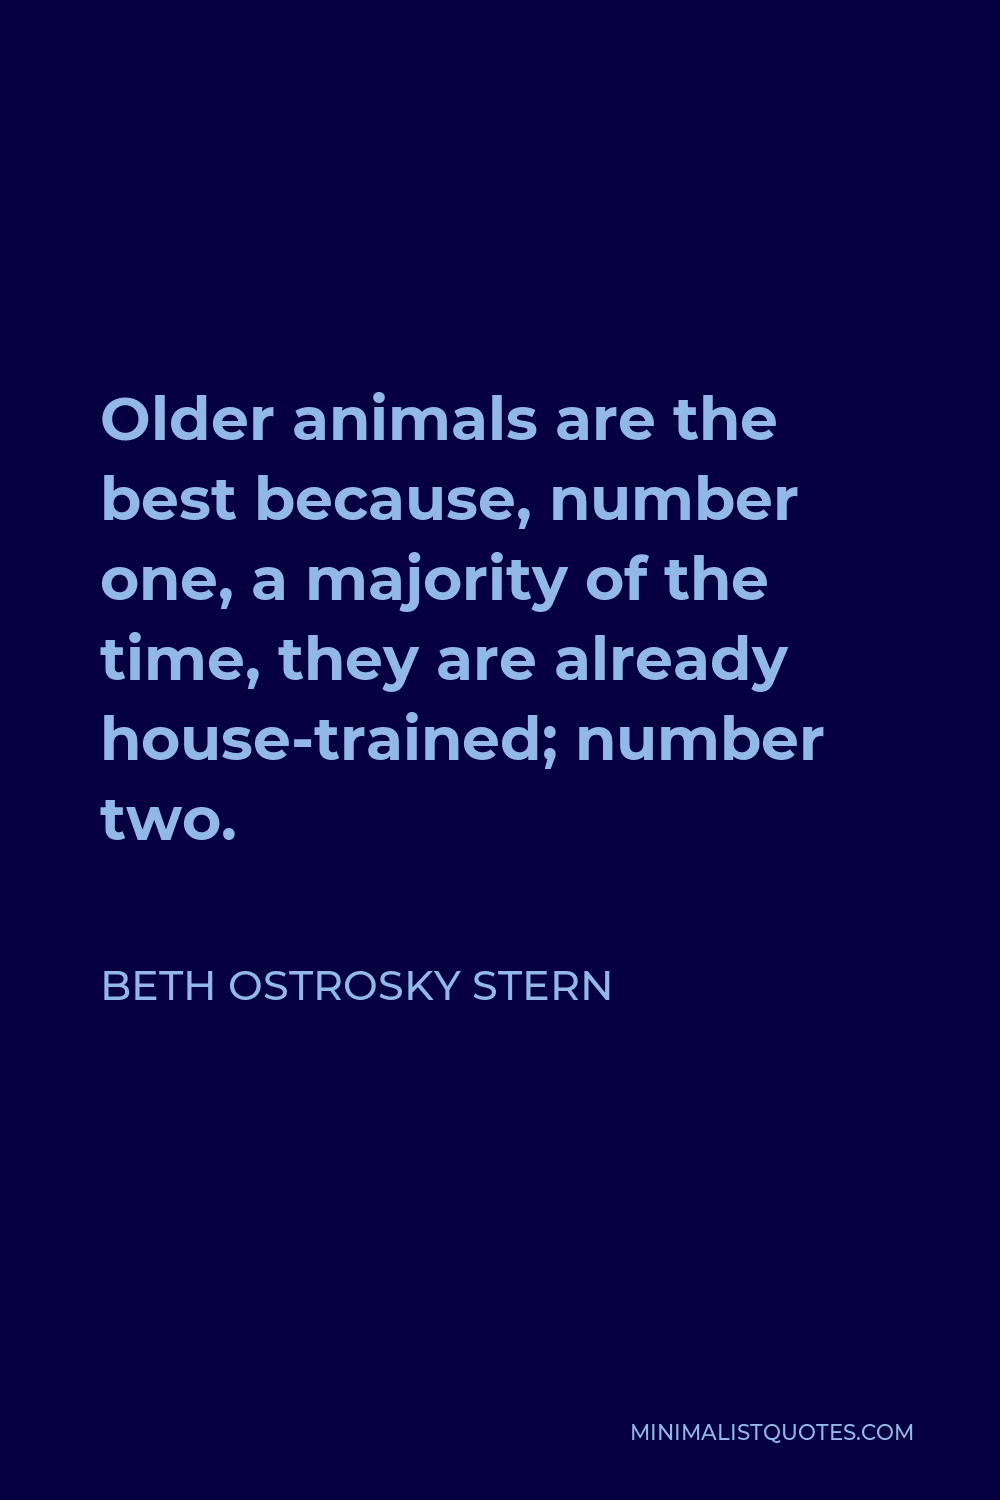 Beth Ostrosky Stern Quote - Older animals are the best because, number one, a majority of the time, they are already house-trained; number two.